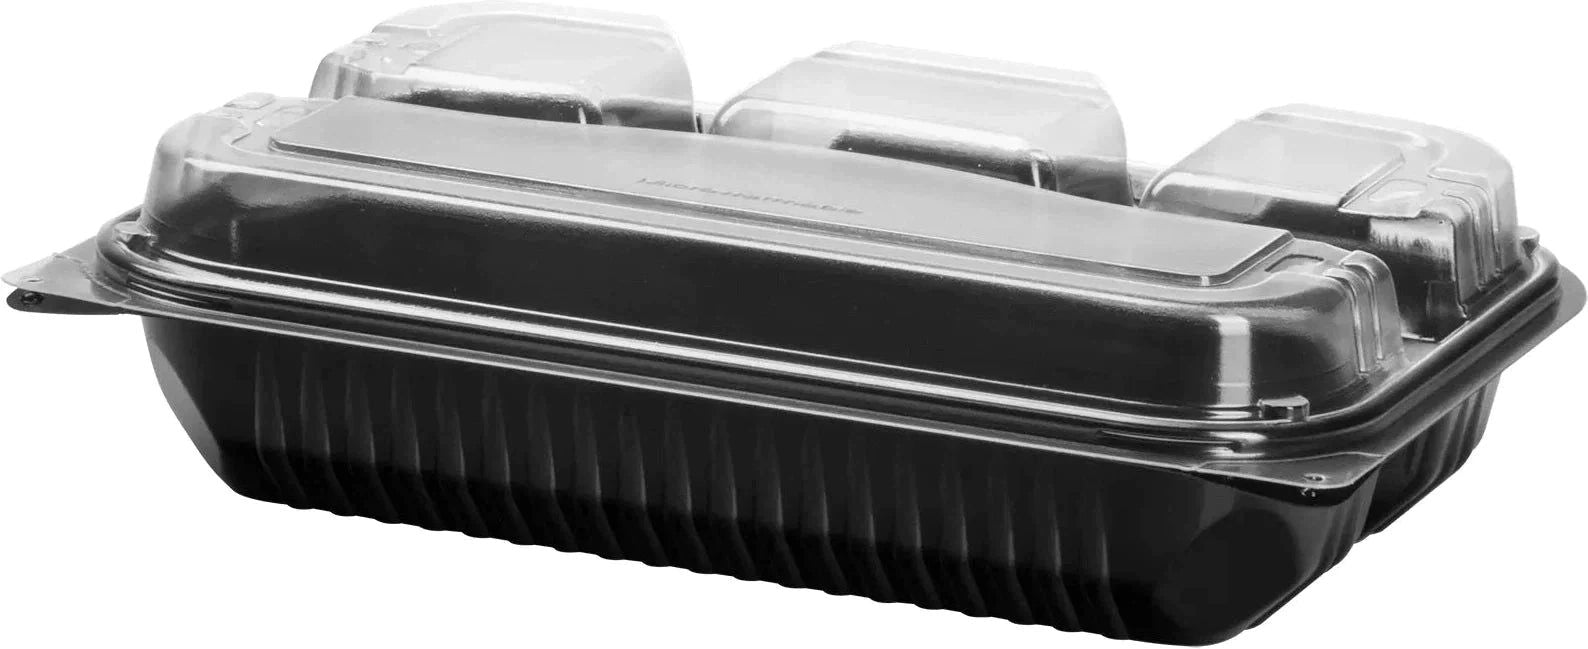 Dart Container - 11.5" x 8" MPS Plastic Black/Clear Hinged Lid 4-Compartment Dinner Box, 100/Cs - 919020-PM94